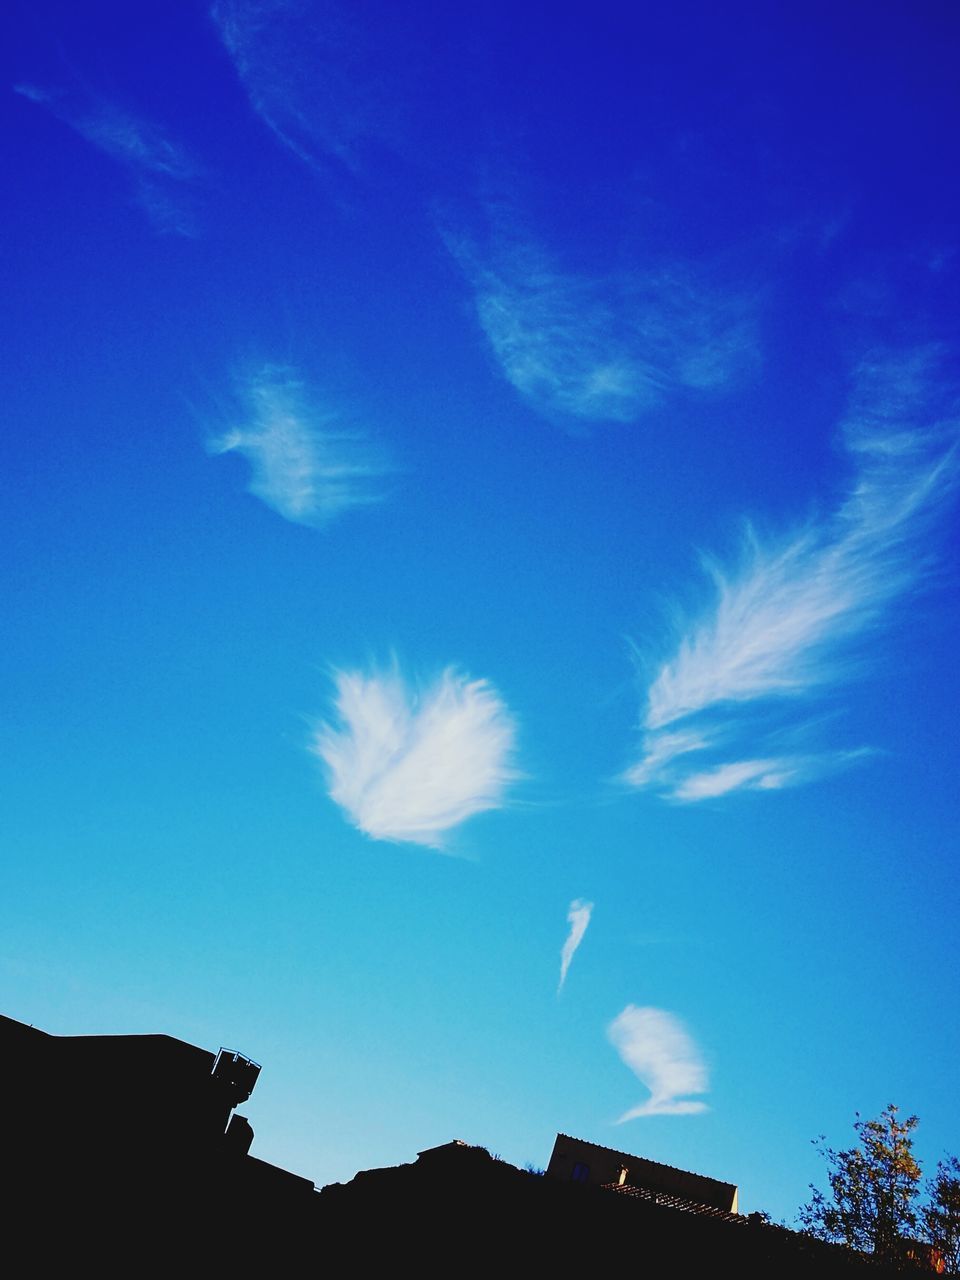 LOW ANGLE VIEW OF SILHOUETTE VAPOR TRAIL IN SKY